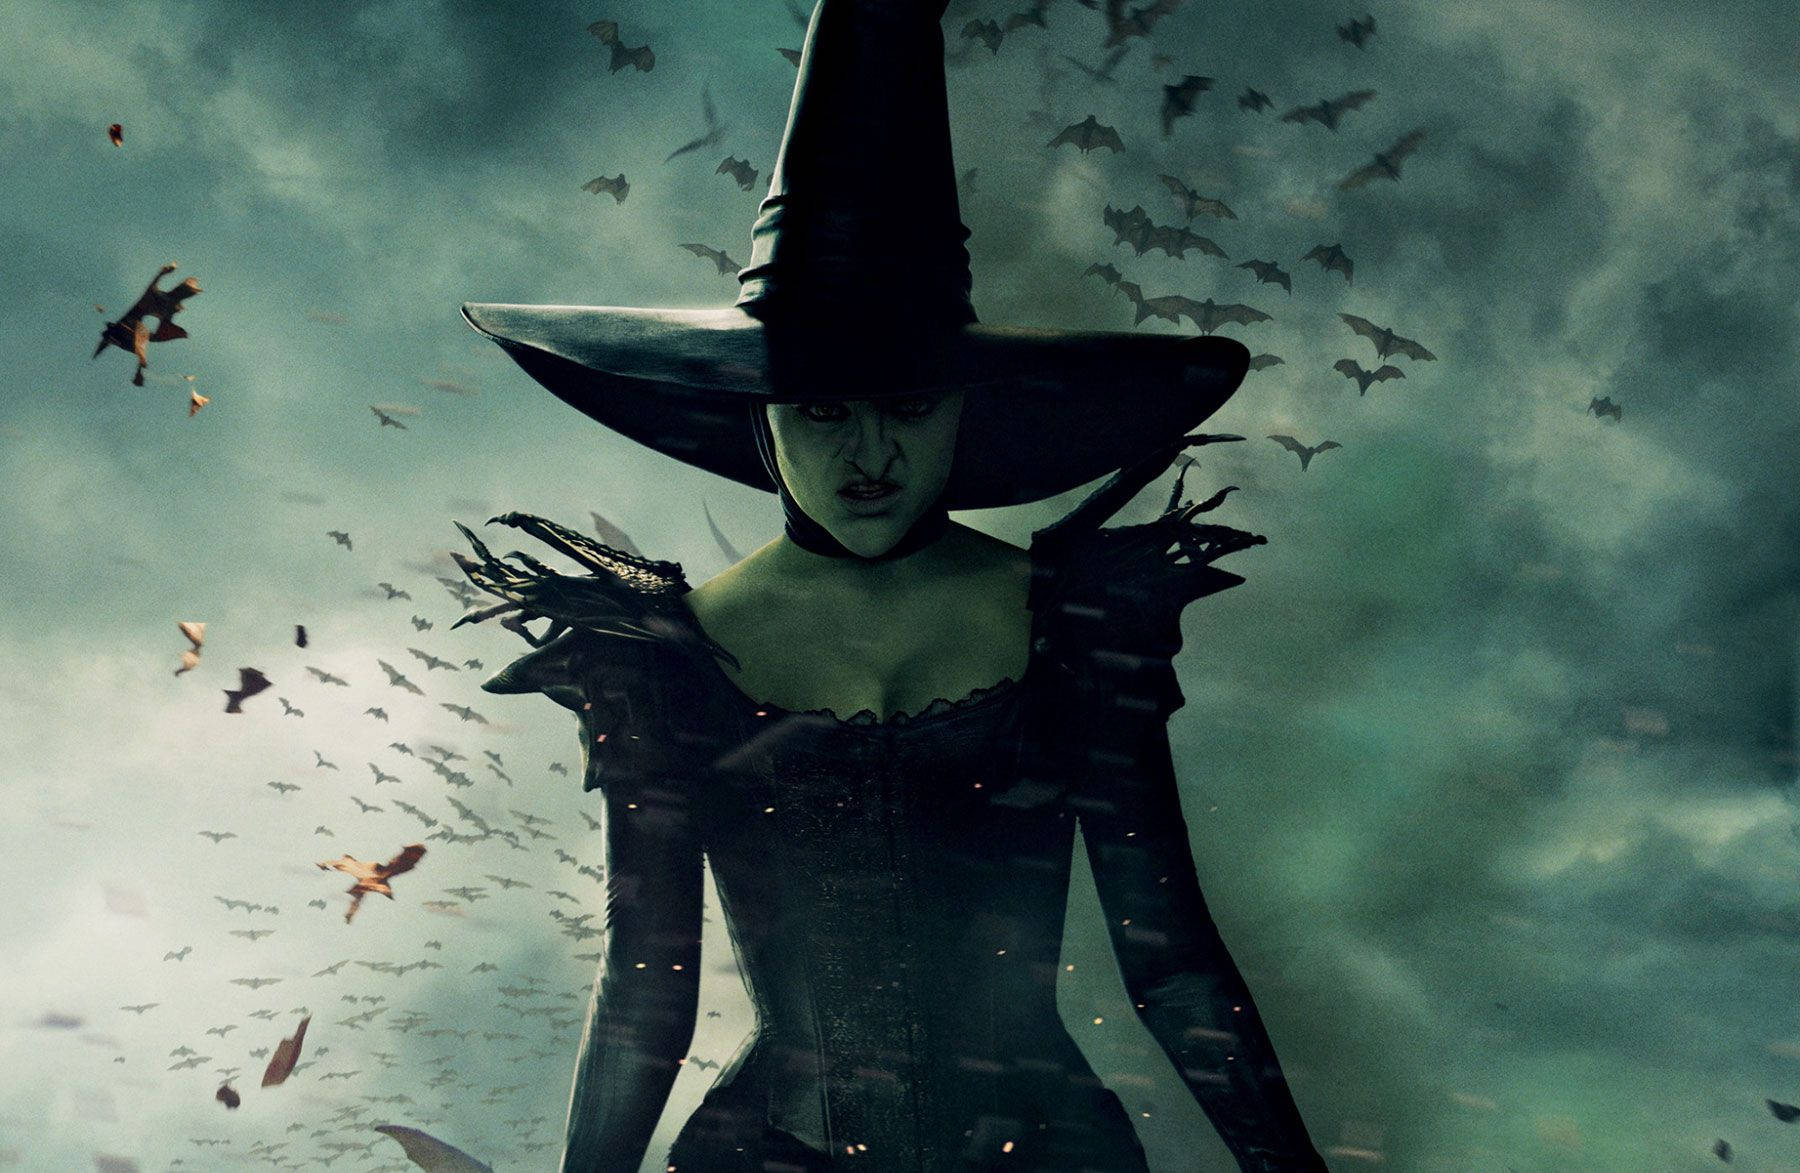 Witch Dark Scary Wallpaper